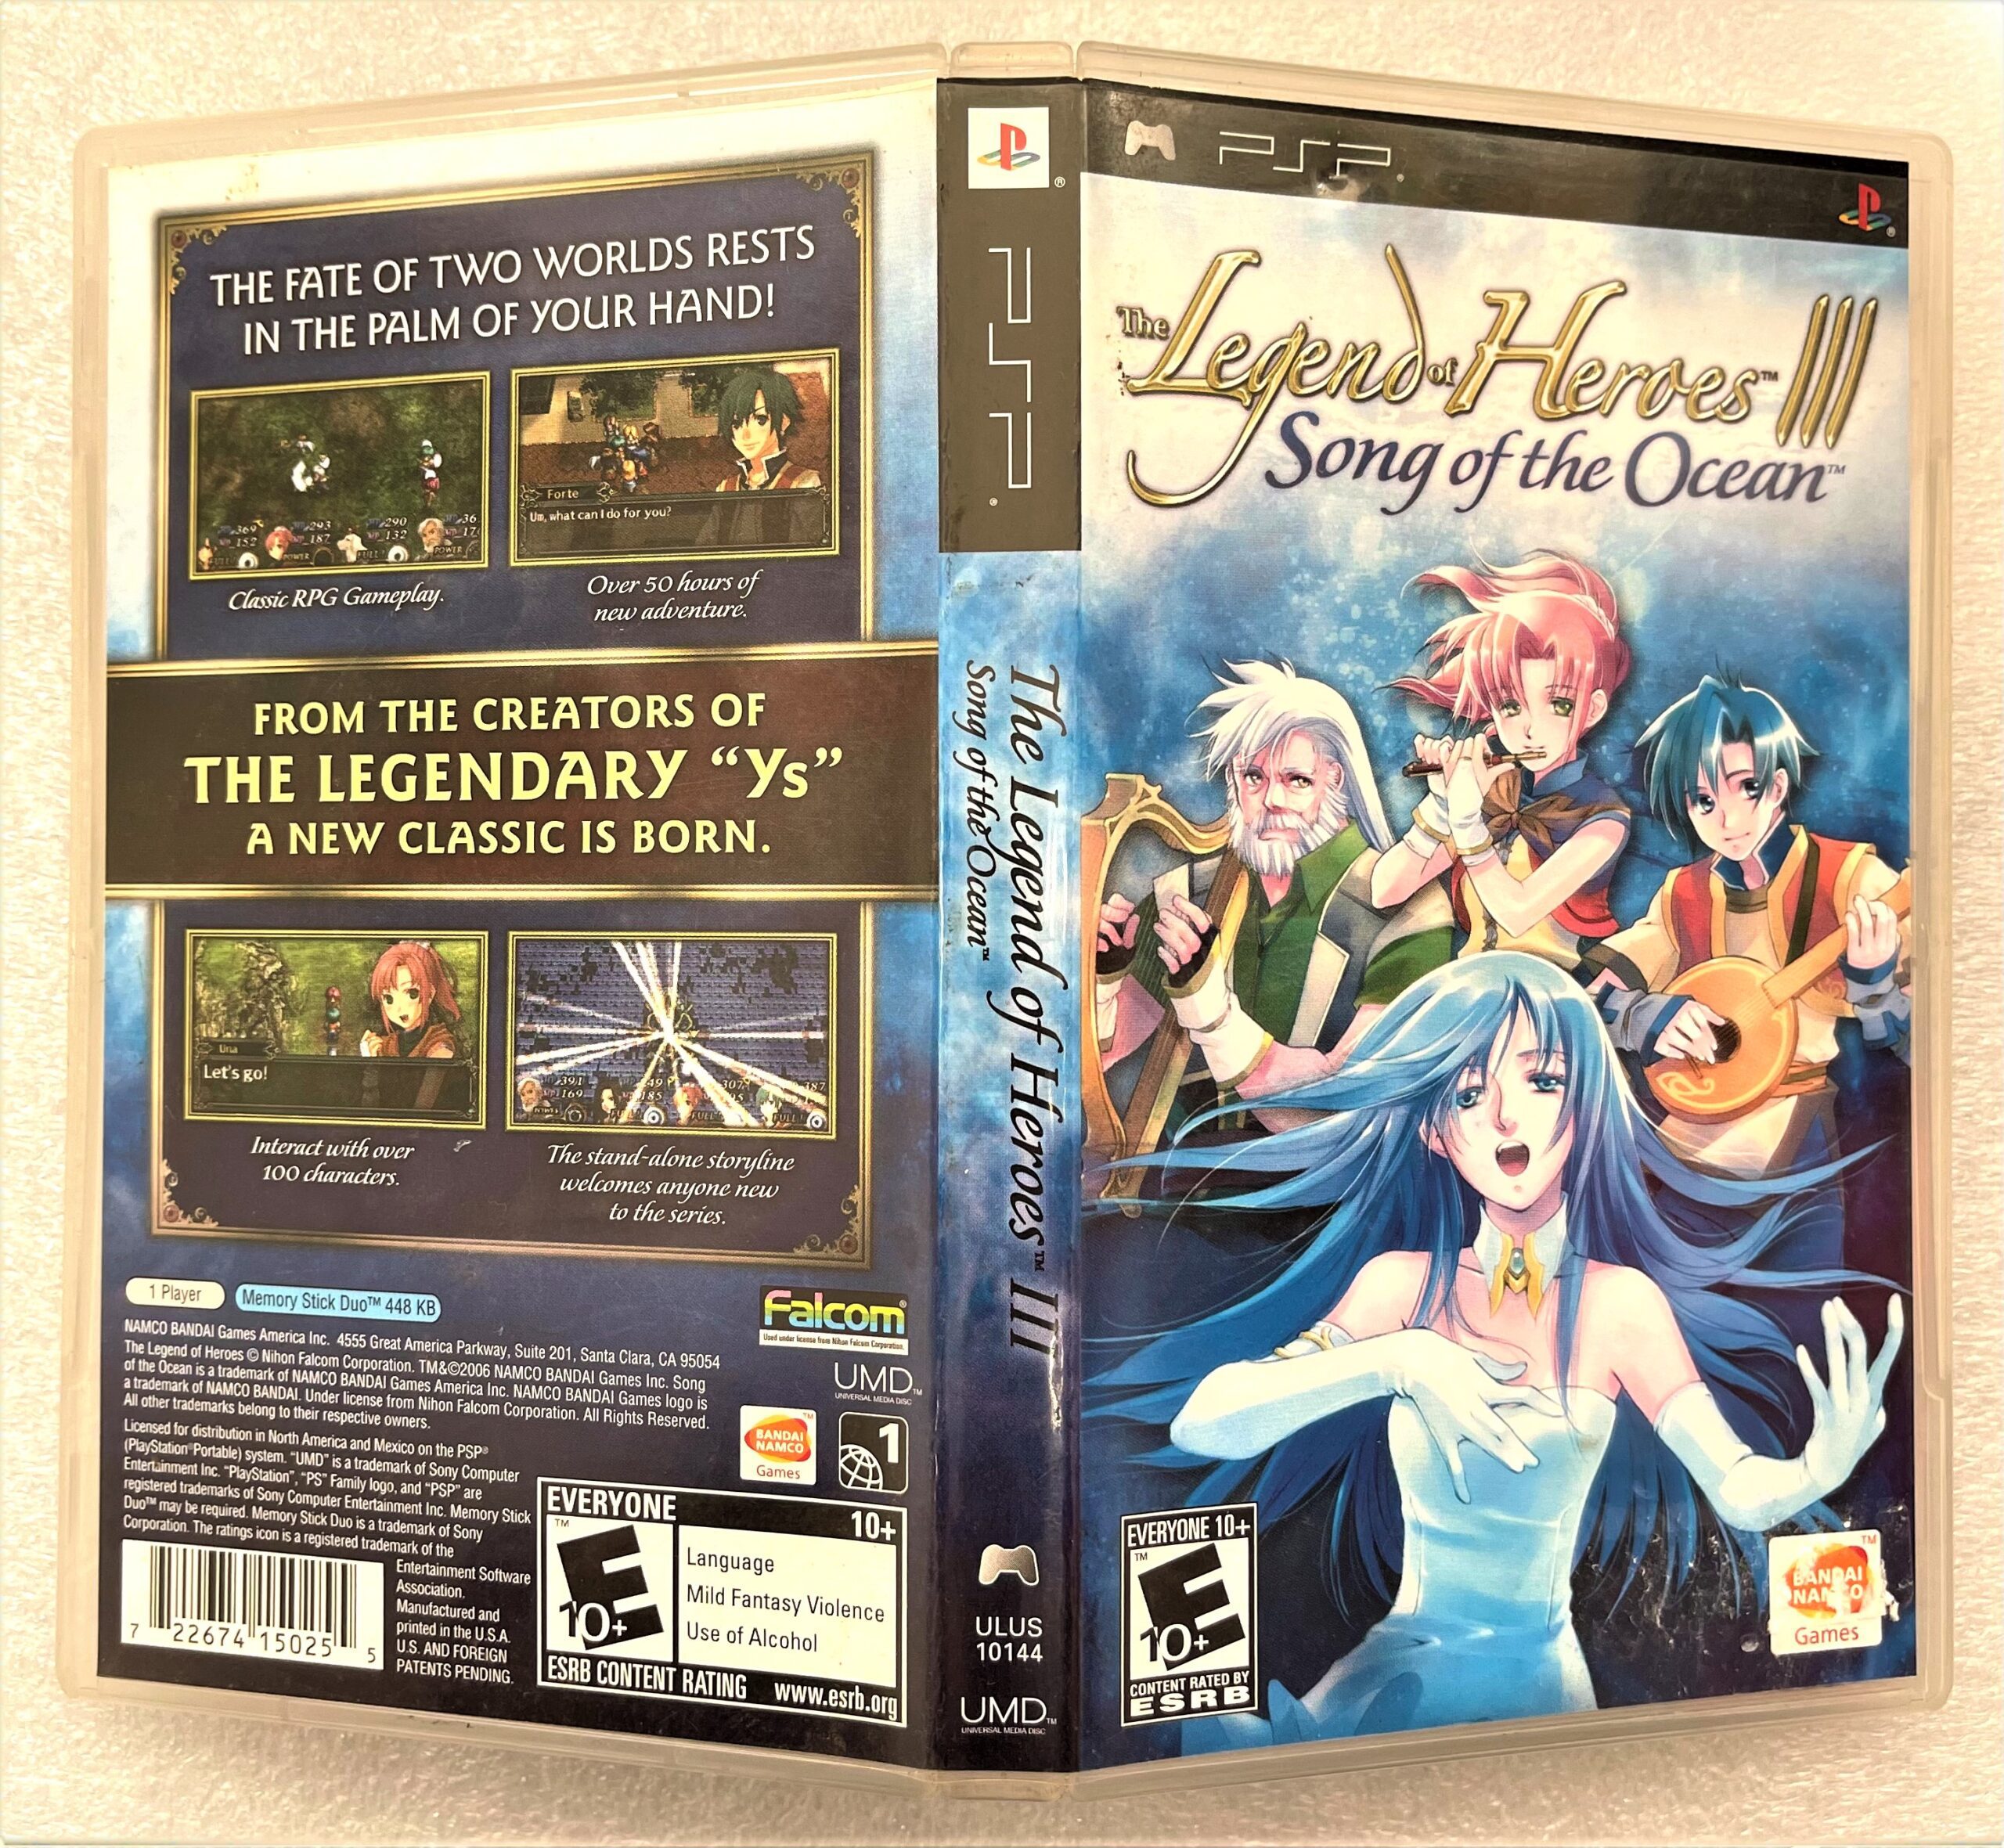 The Legend of Heroes III: Song of the Ocean for PSP